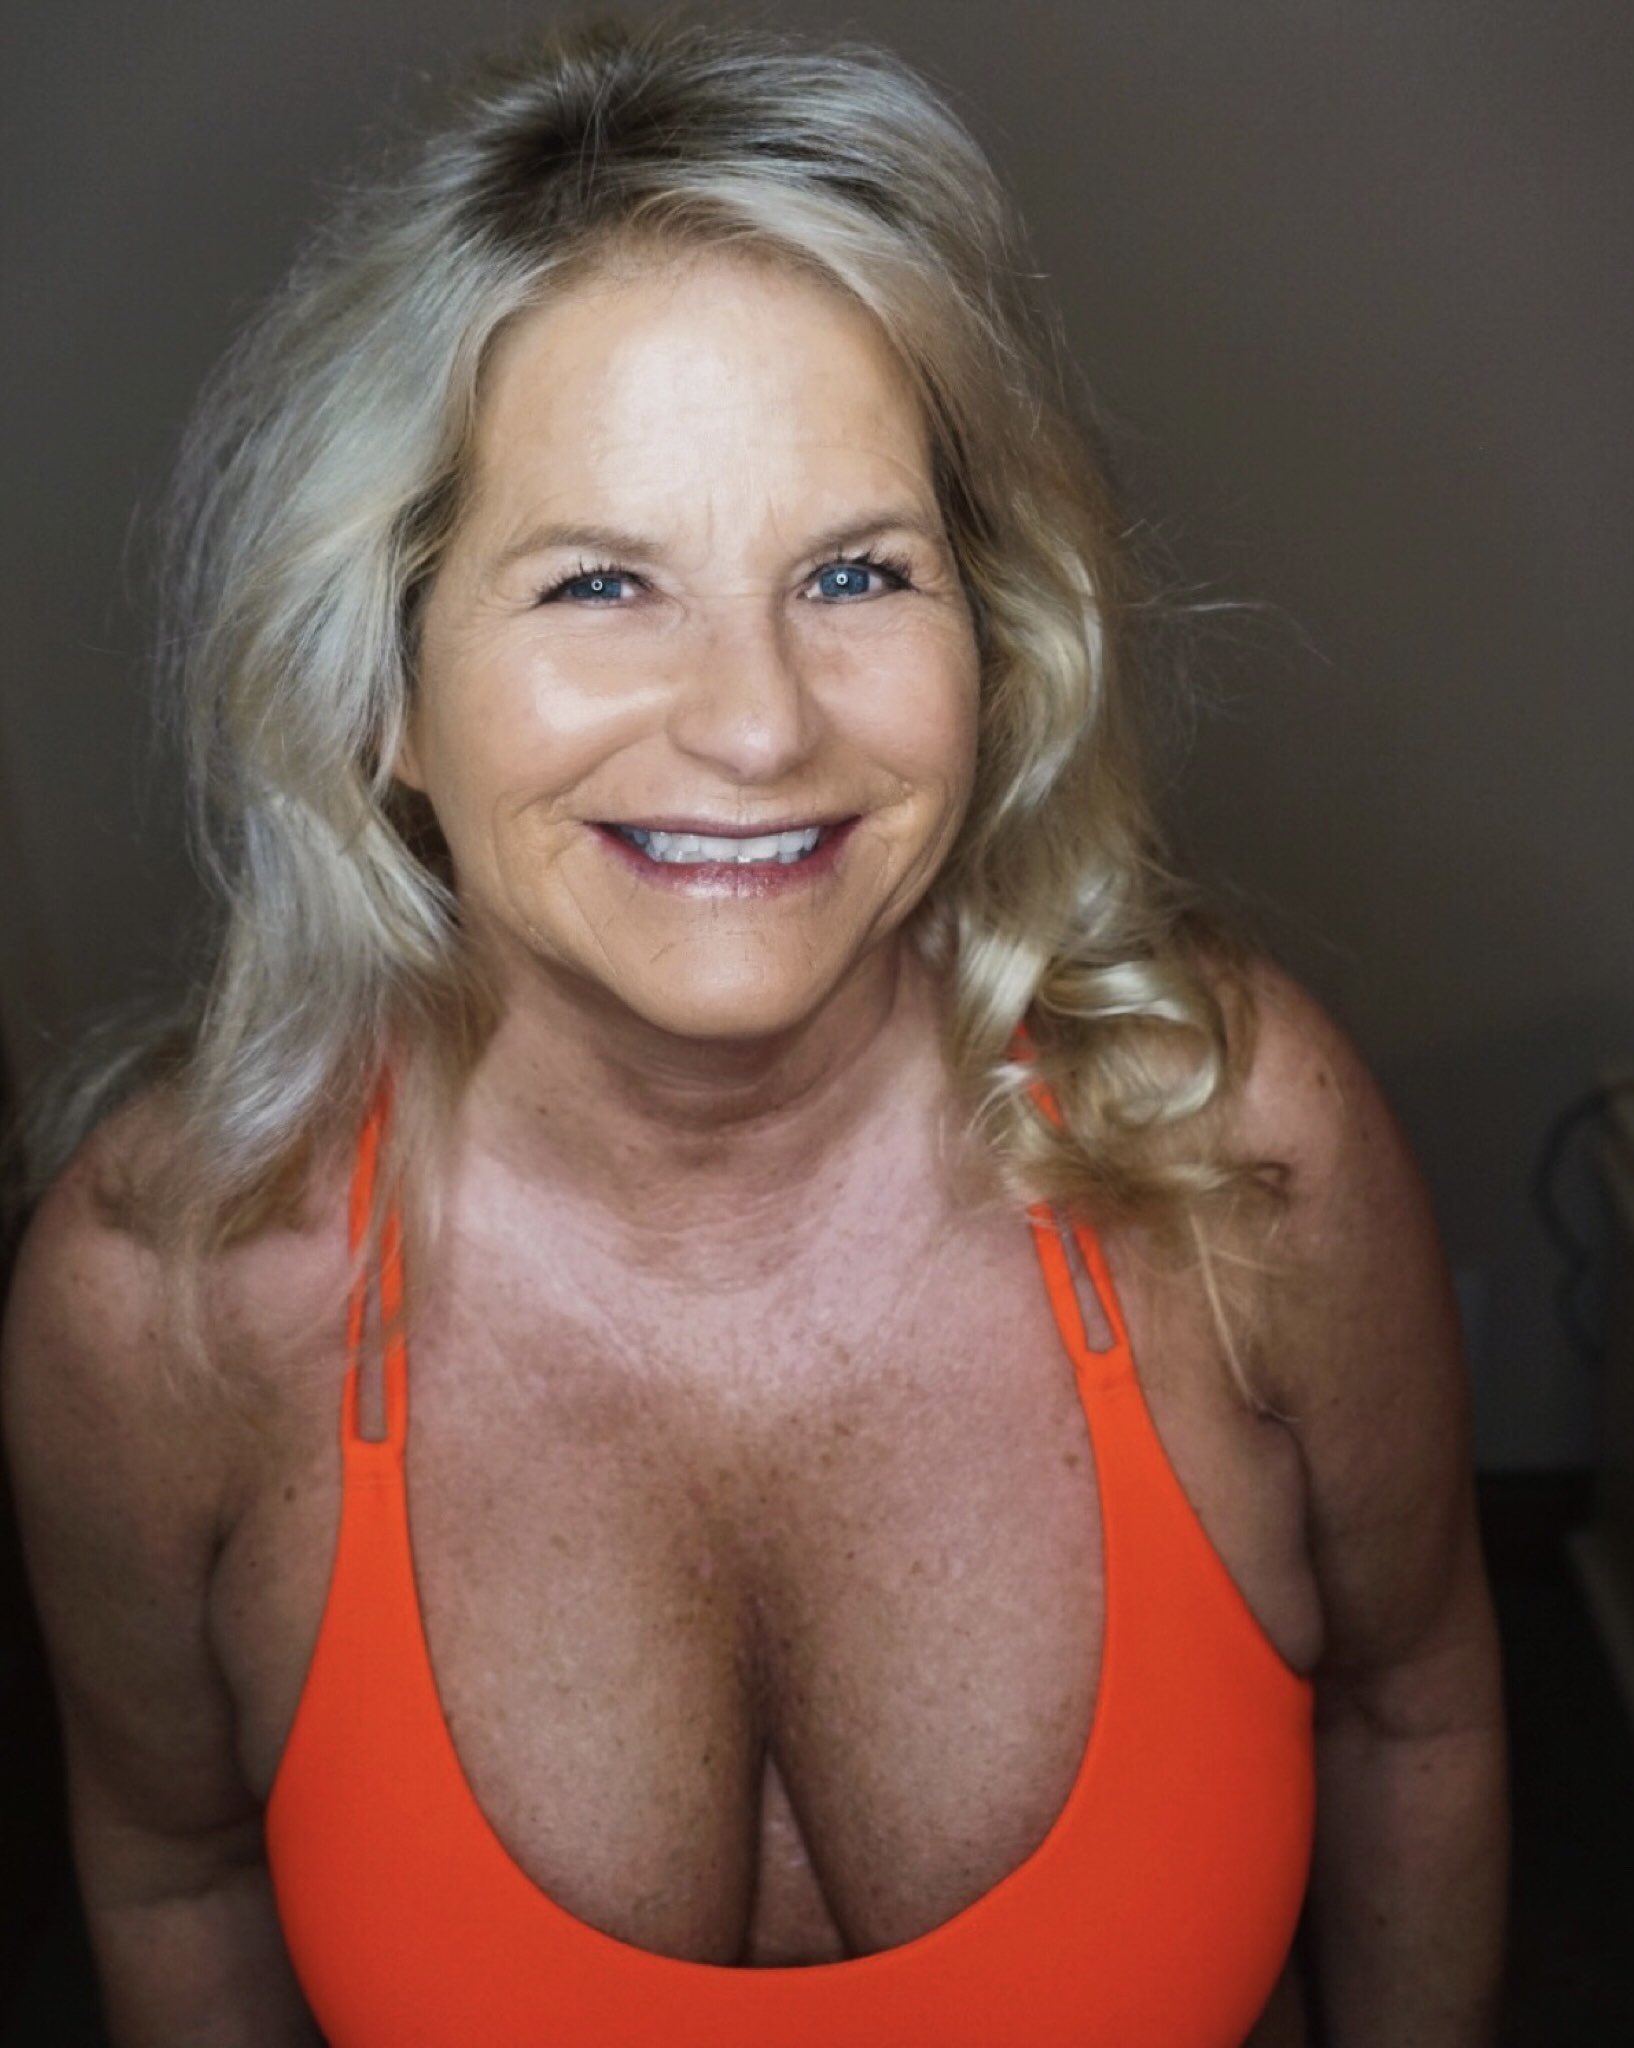 Hot Wife Candy On Twitter Looking Forward To A Great Week Hotwife 